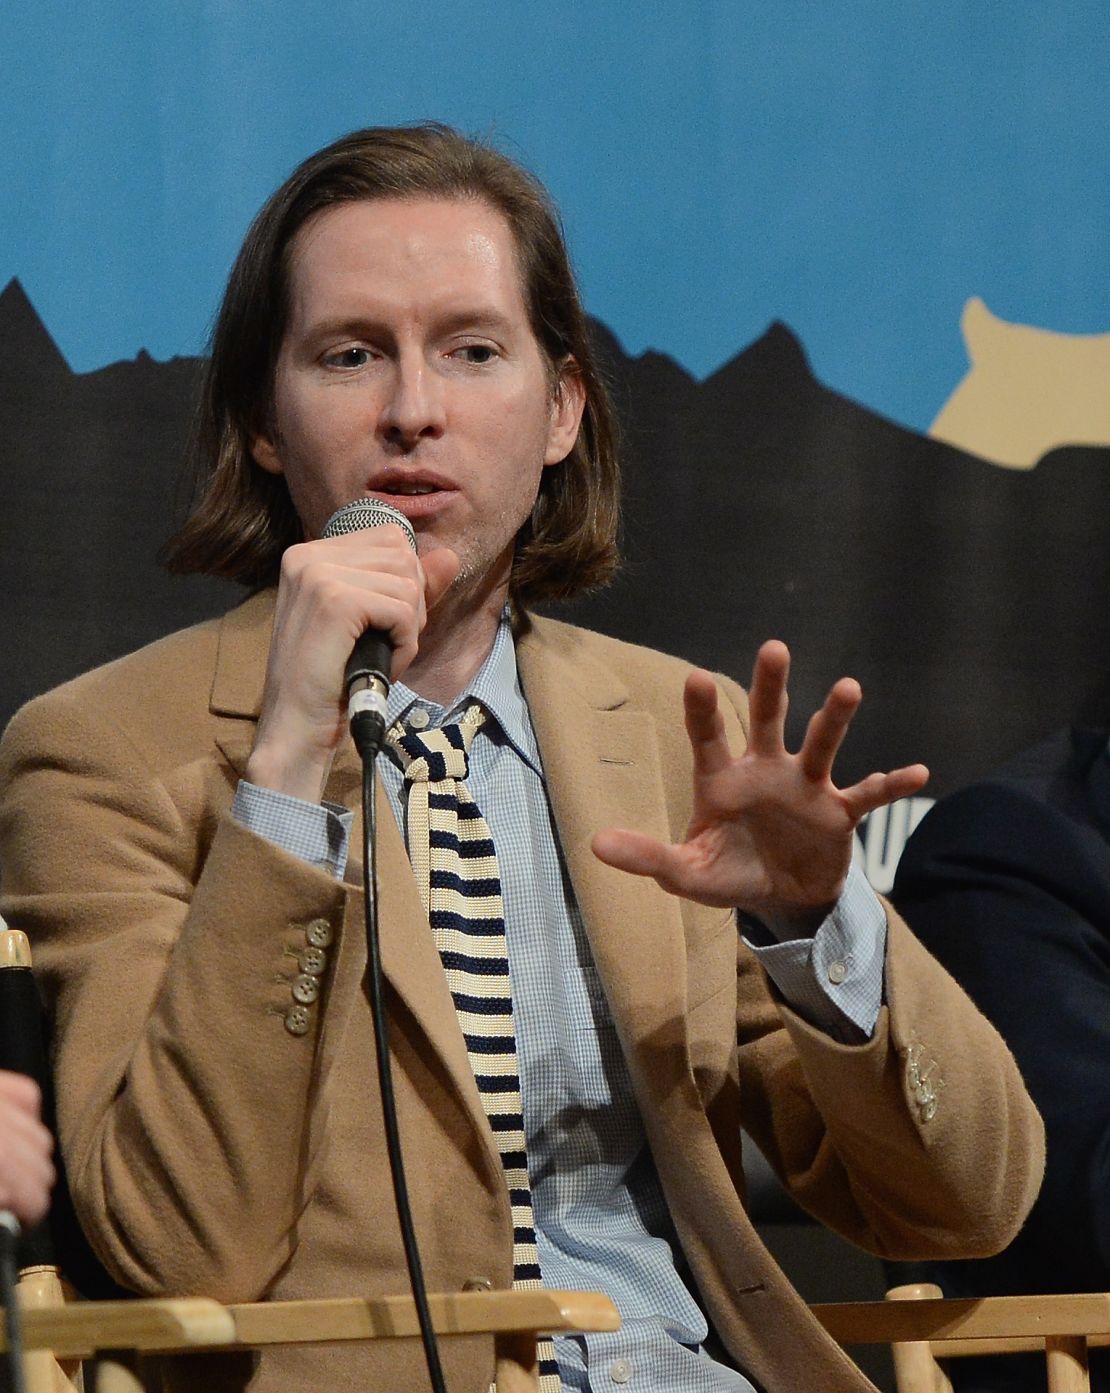 Wes Anderson will answer passengers' questions